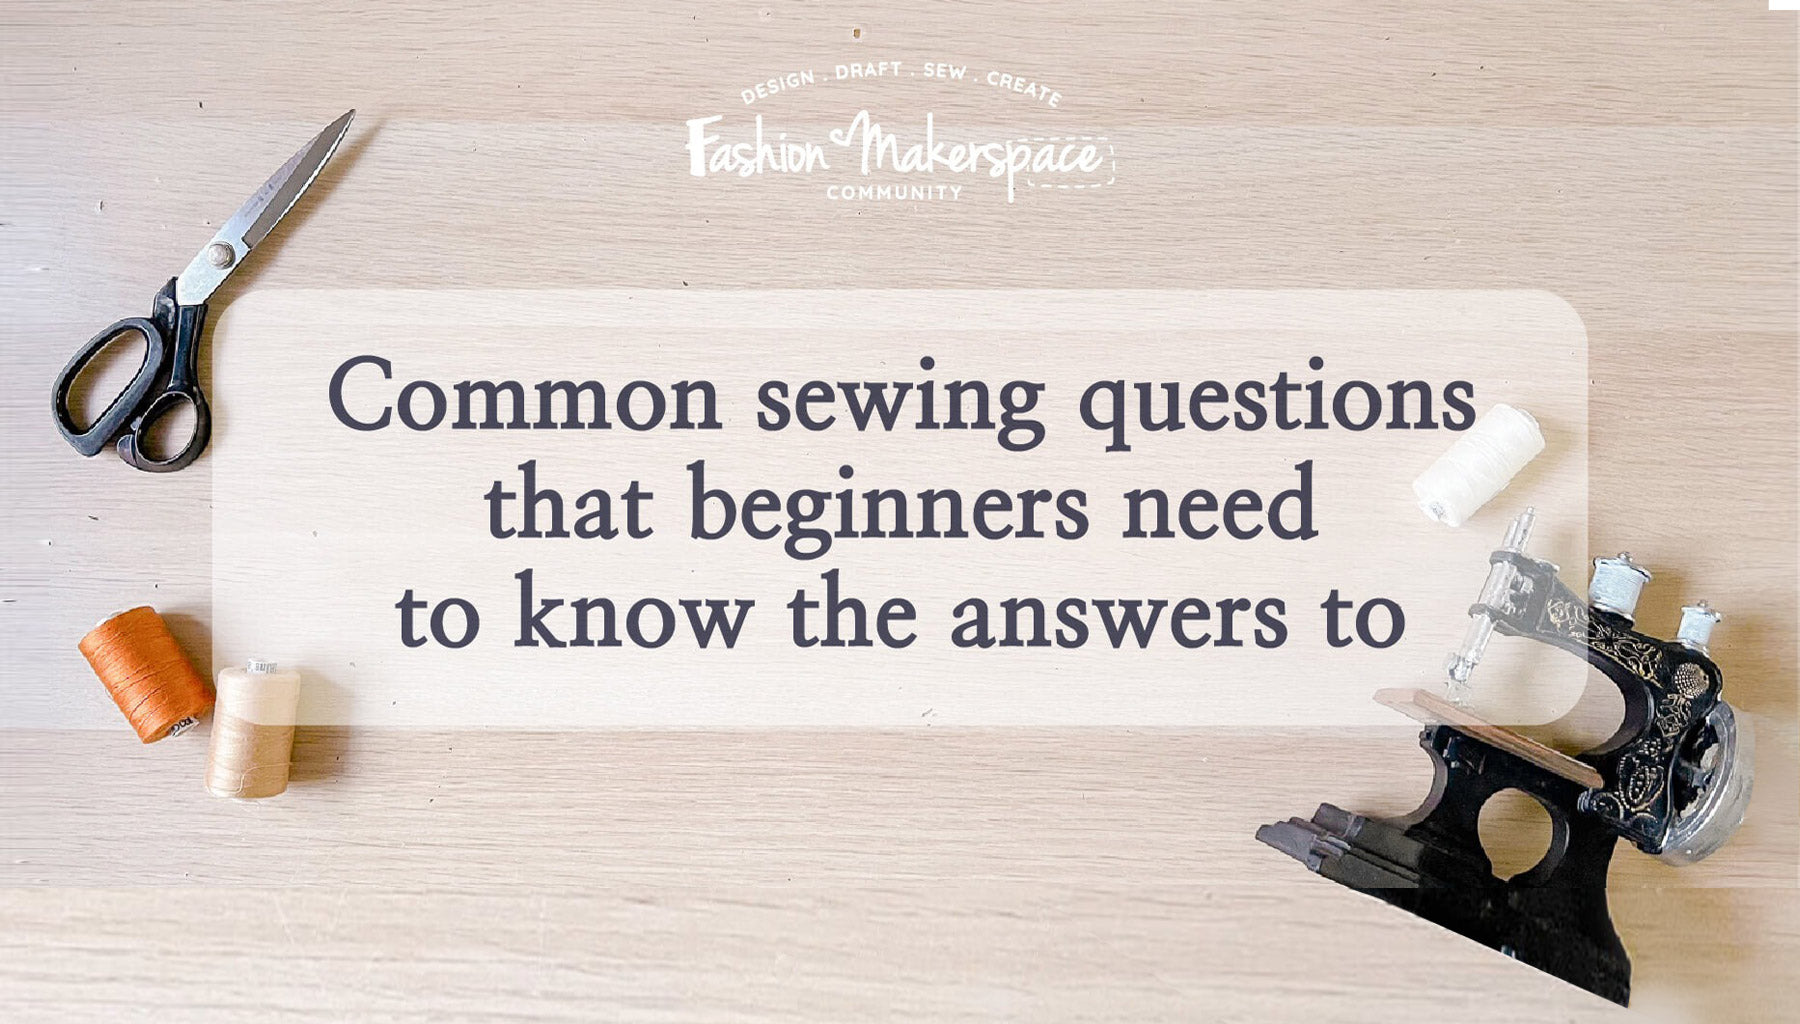 Most Common Sewing Questions that Beginners Need to Know!